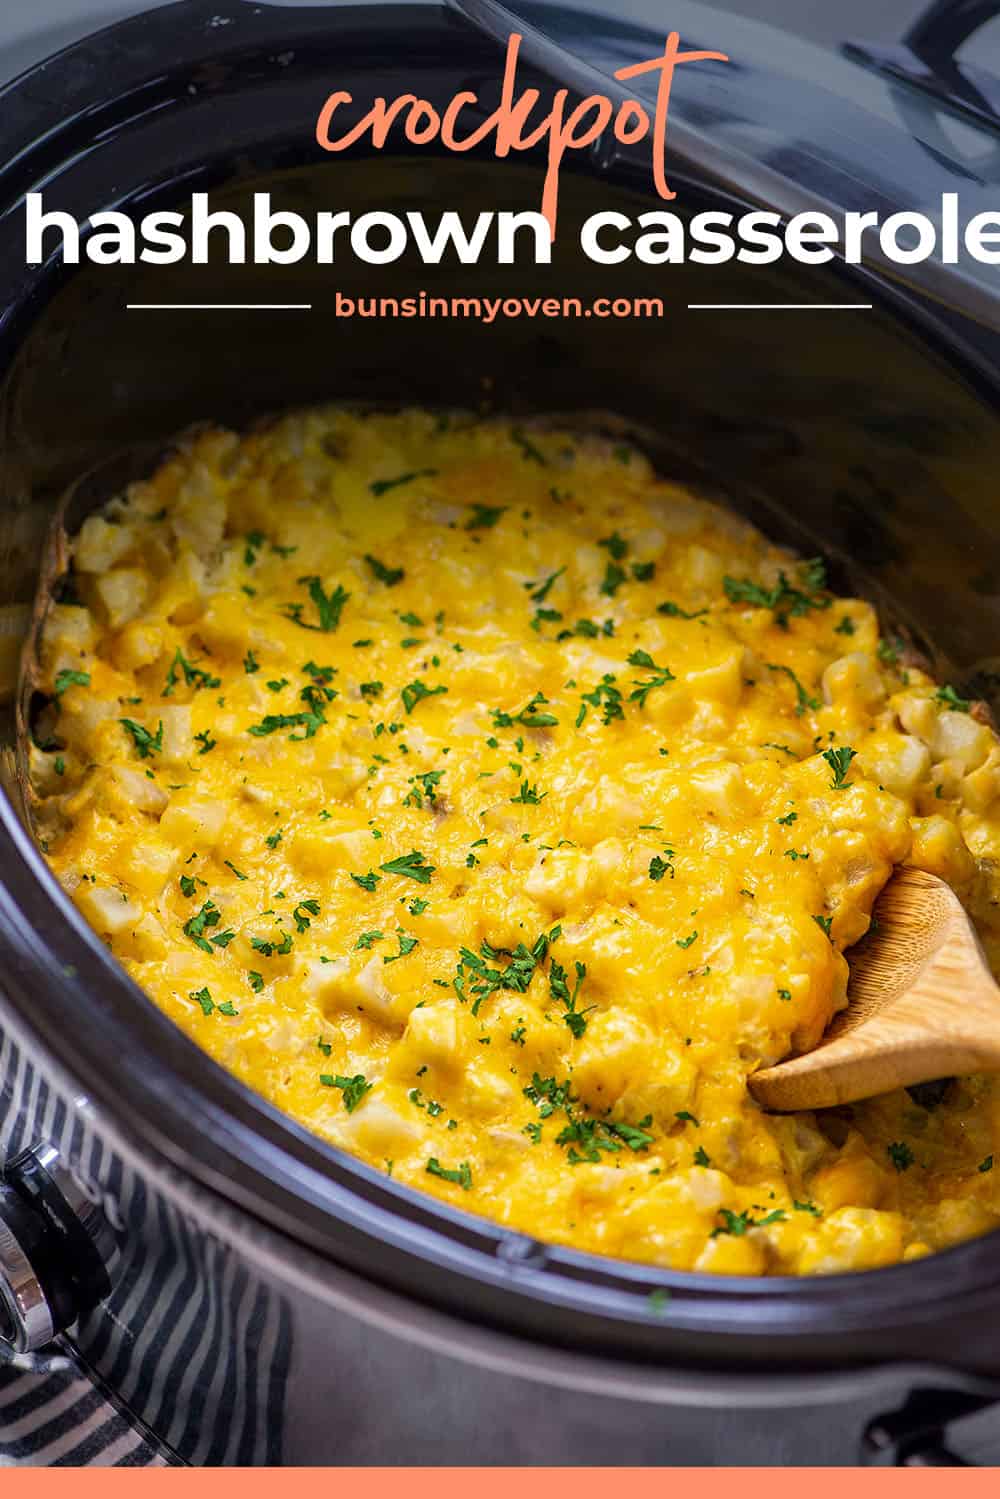 Cheesy Hashbrown Casserole in the Slow Cooker! | Buns In My oven